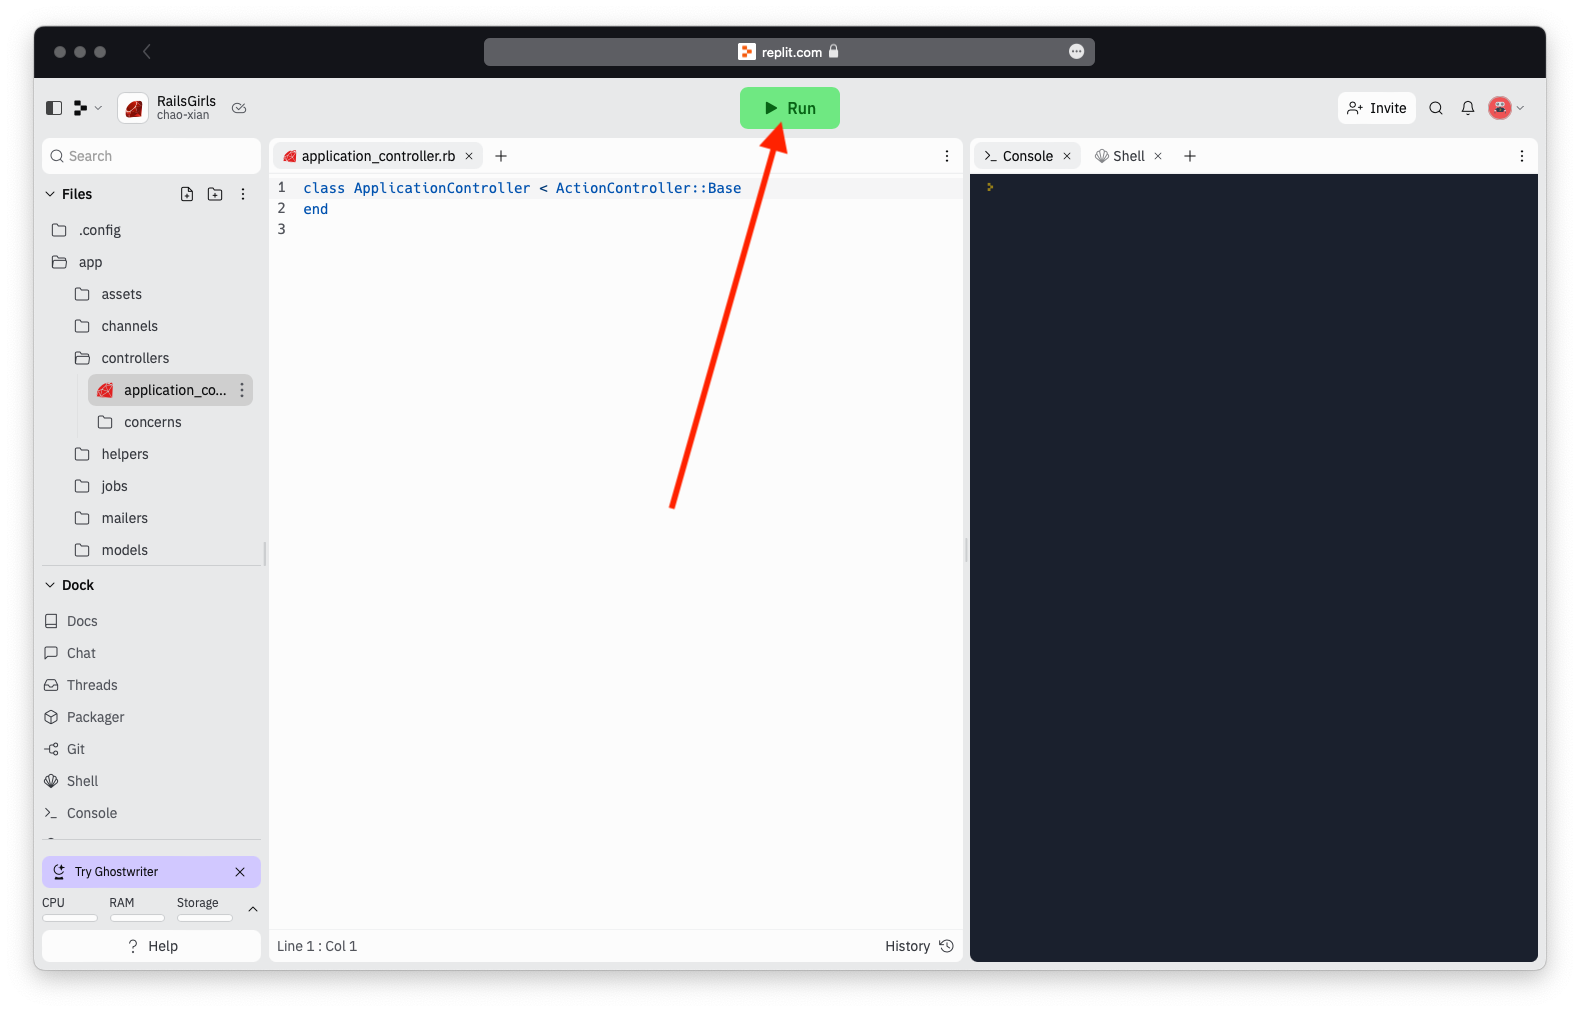 Run button highlighted to start the Rails app